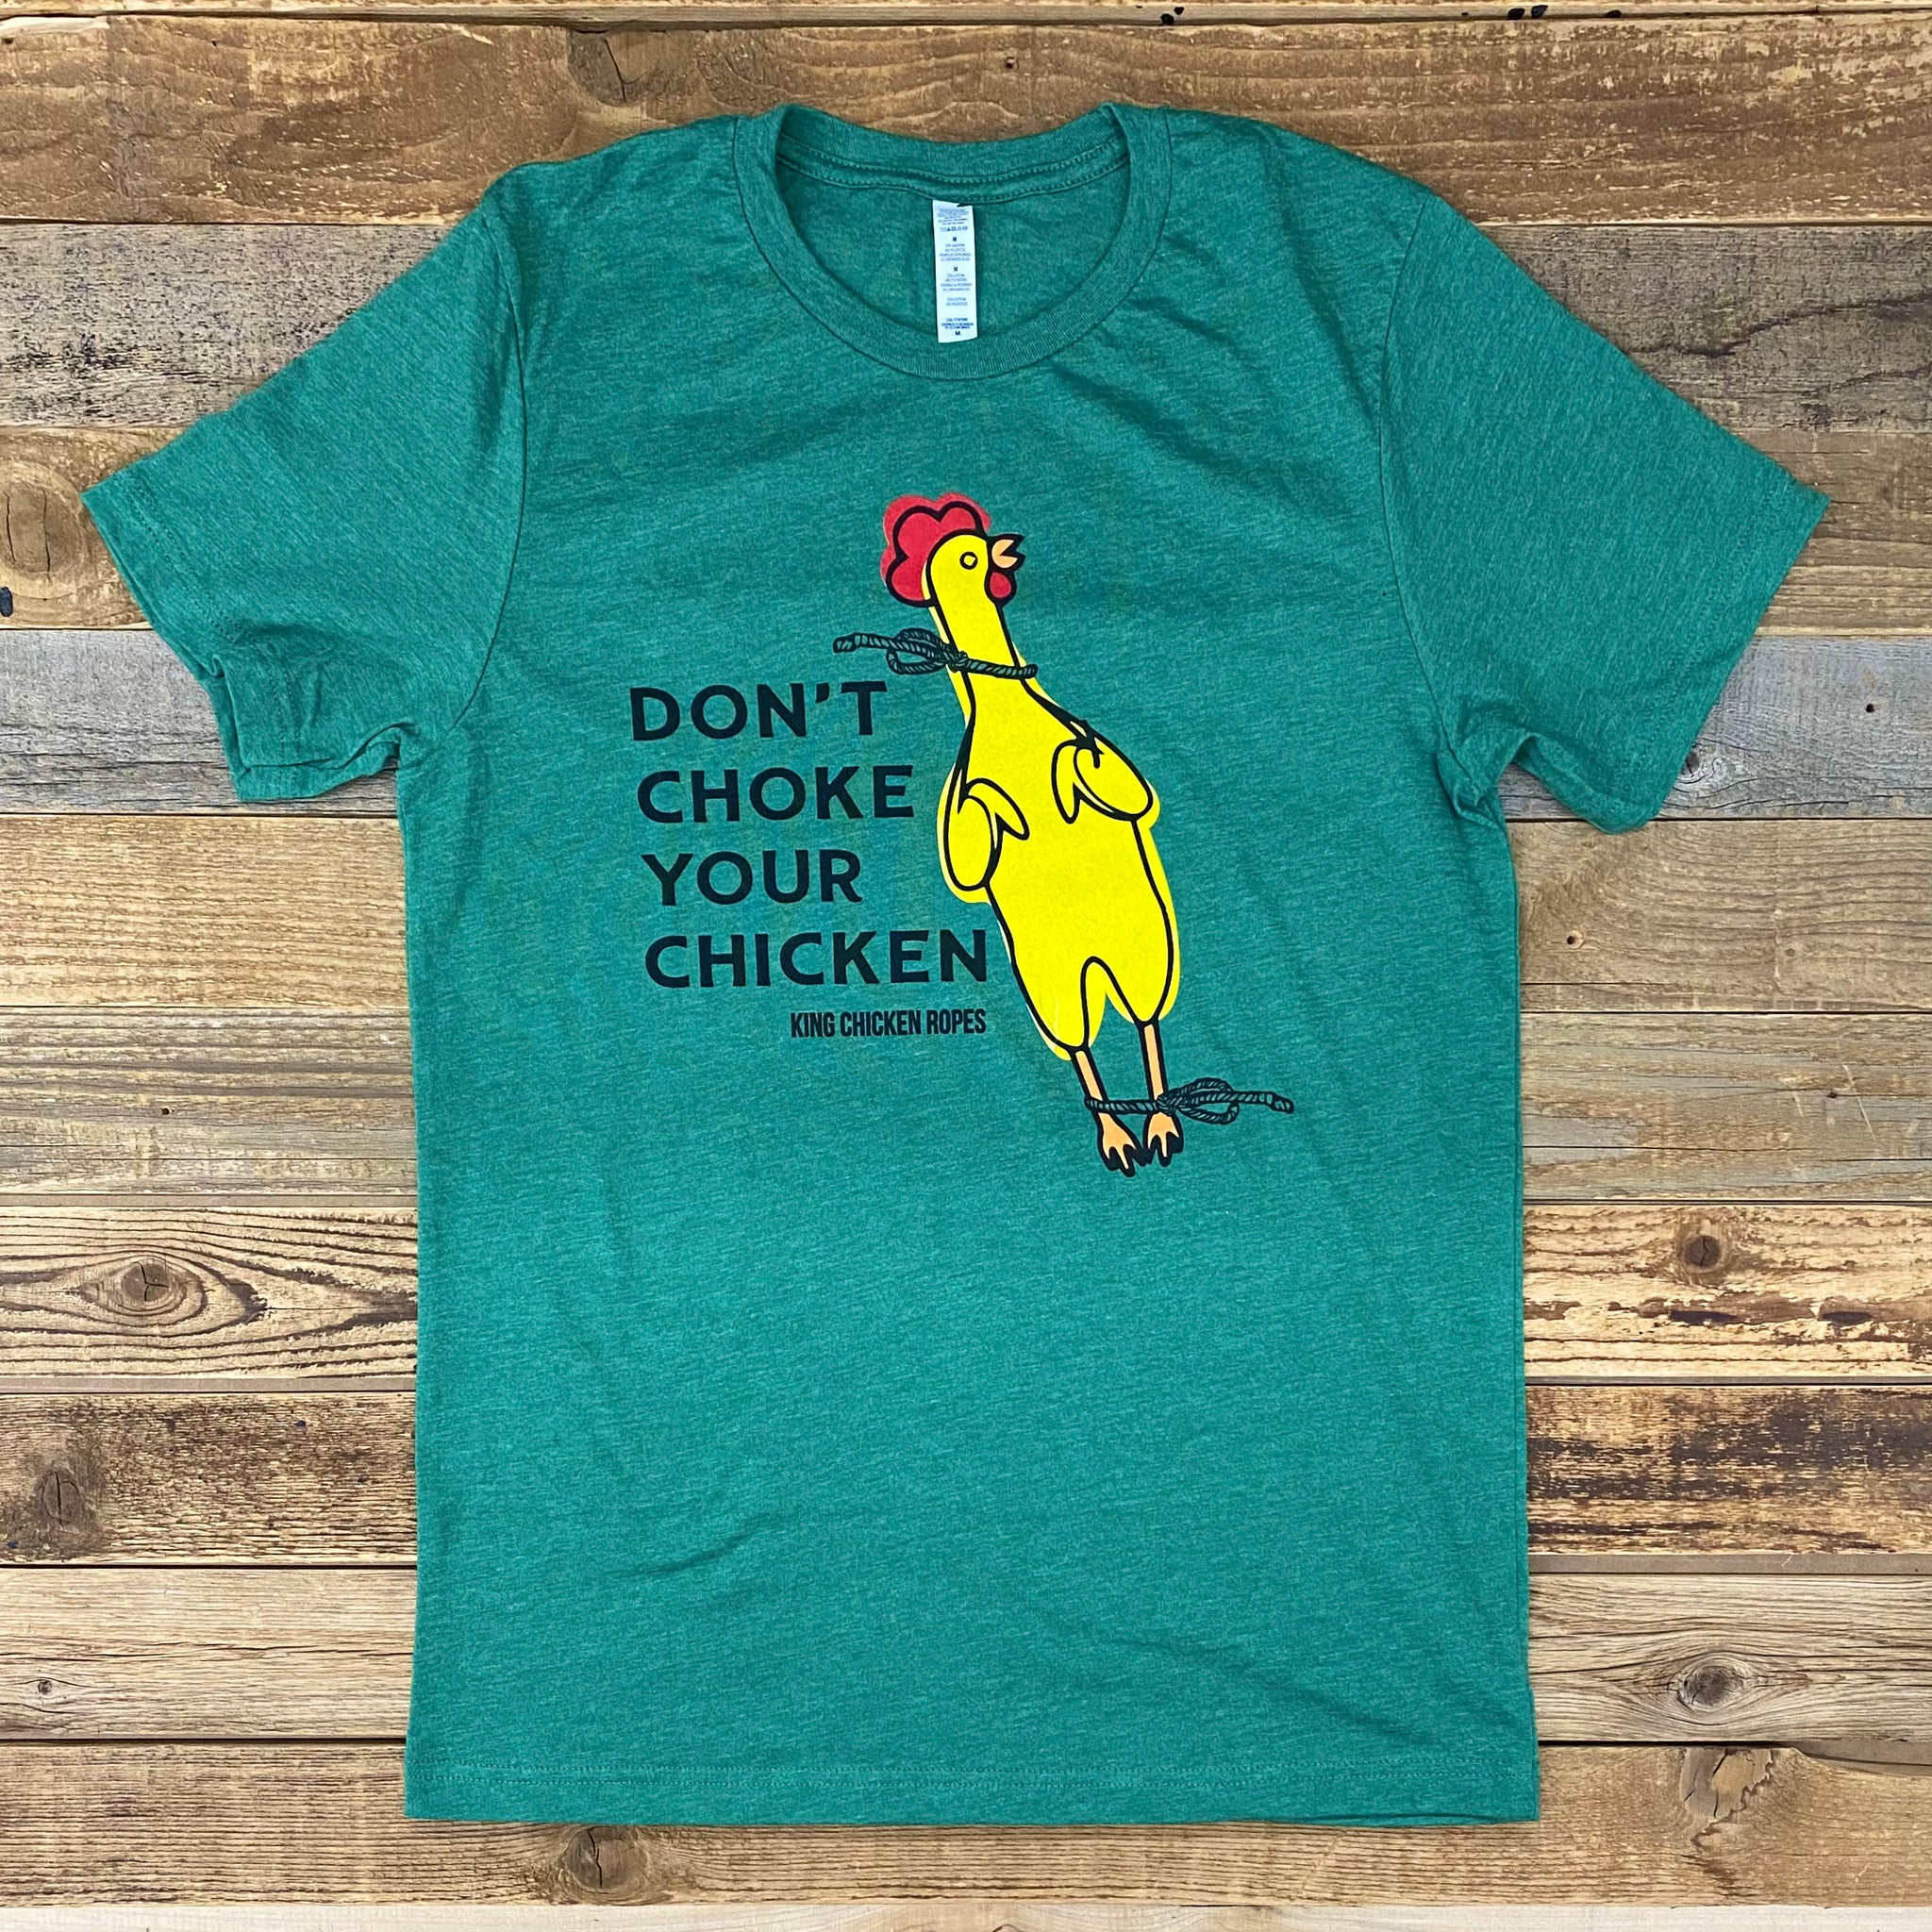 konjugat Pinpoint Elskede Don't Choke Your Chicken Tee – King Ropes